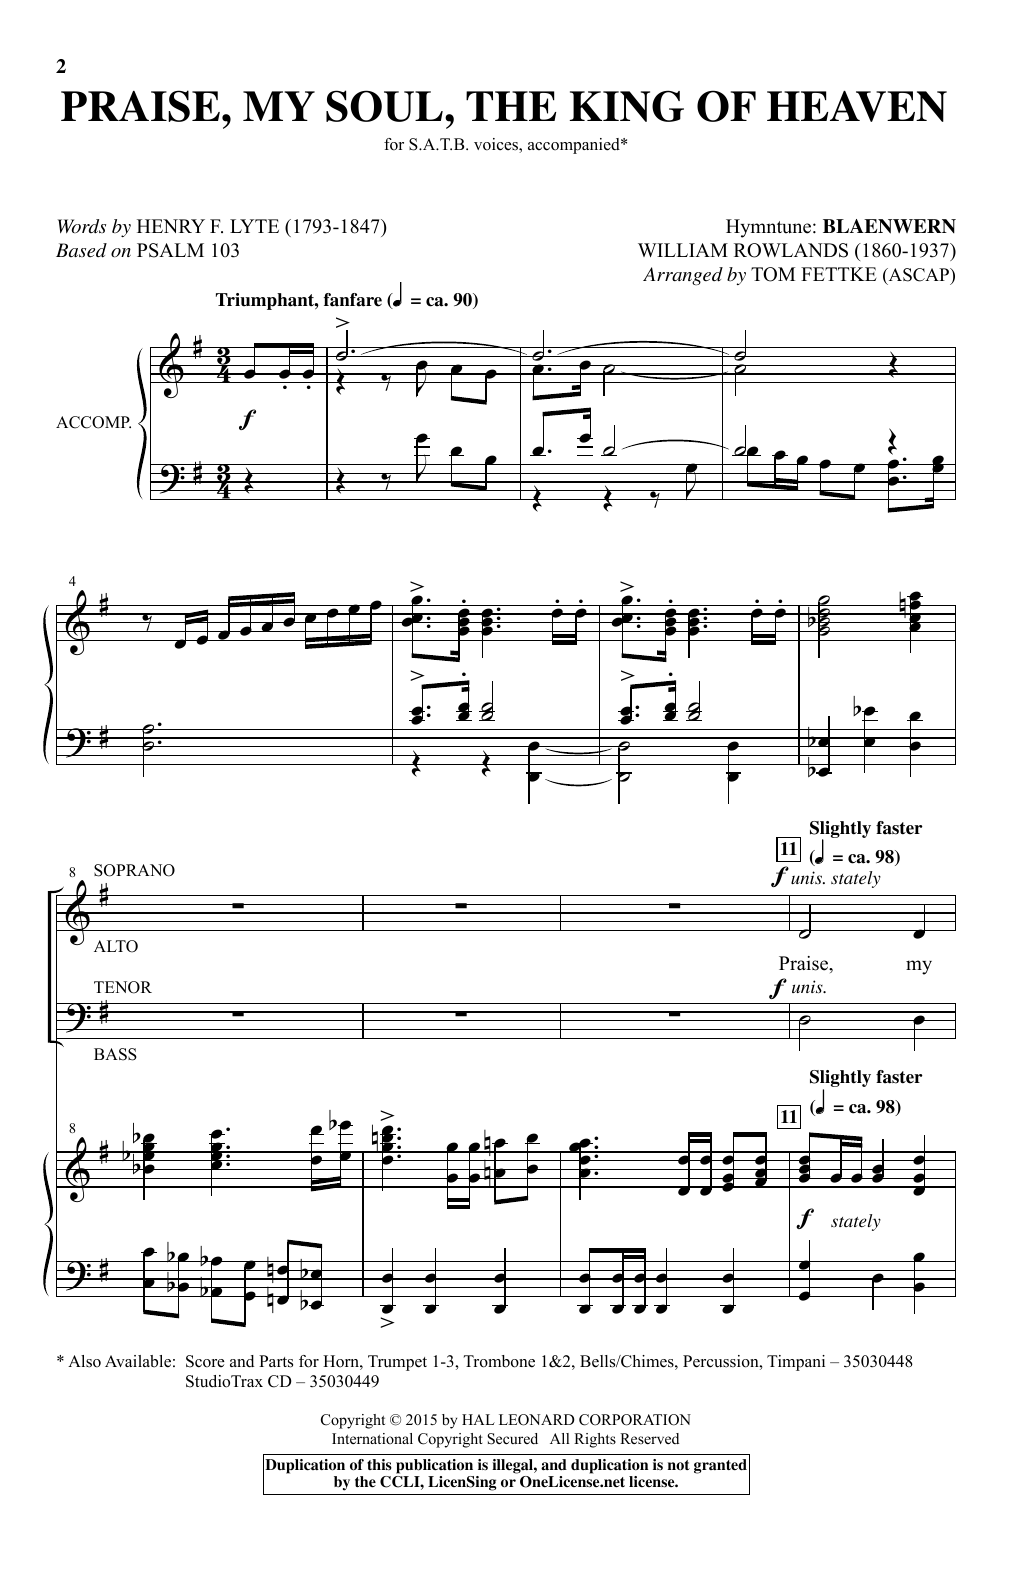 Download William Rowlands Praise, My Soul, The King Of Heaven (ar Sheet Music